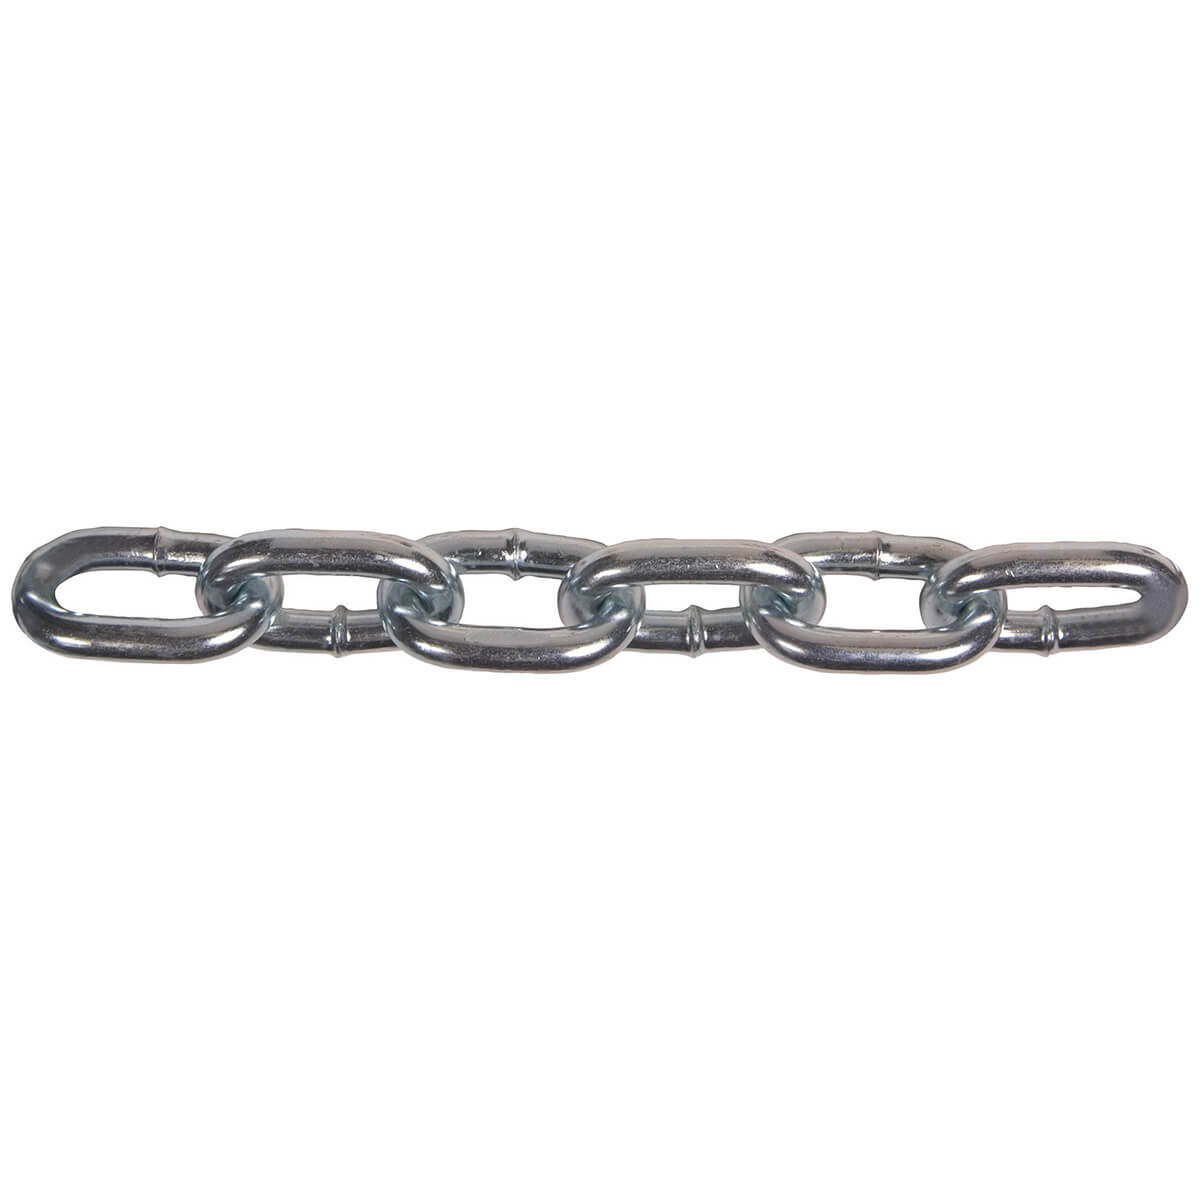 Grade 30 Proof Coil Chain - Zinc Plated